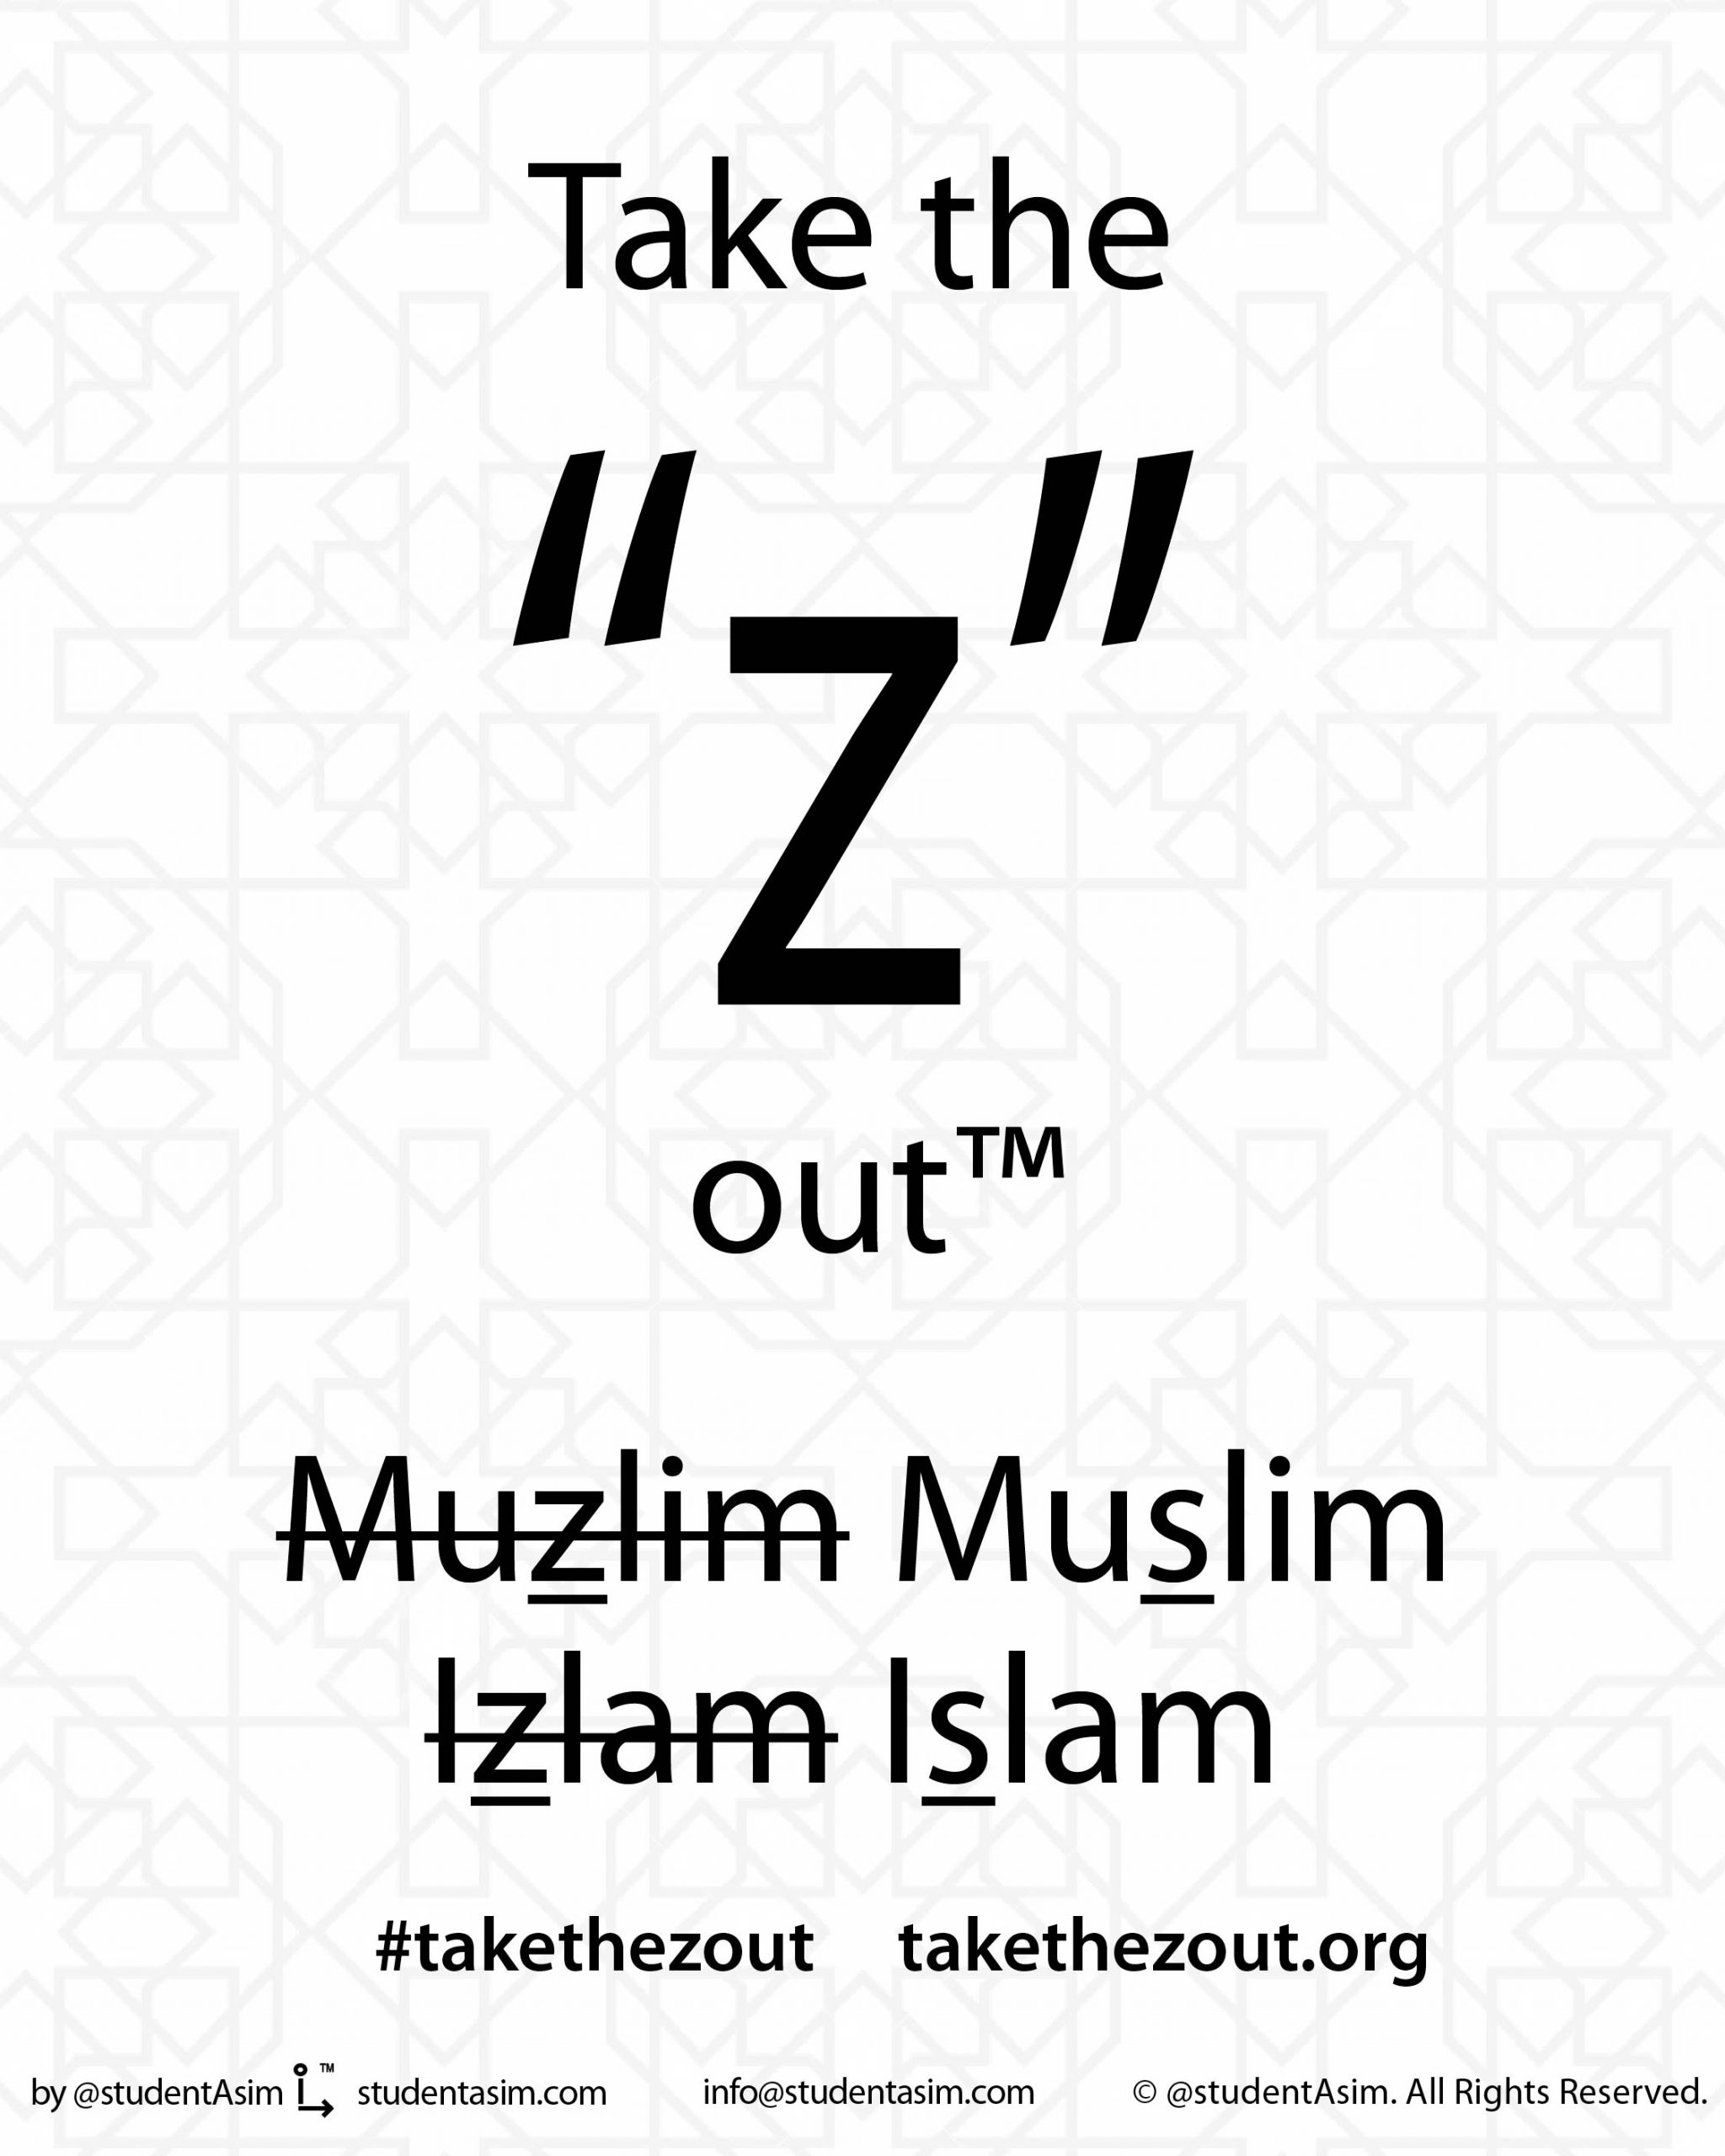 Black text on a white background that says "Take the 'Z' out; -Muzlim- Muslim -Izlam- Islam; hashtag take the z out; takethezout.org"